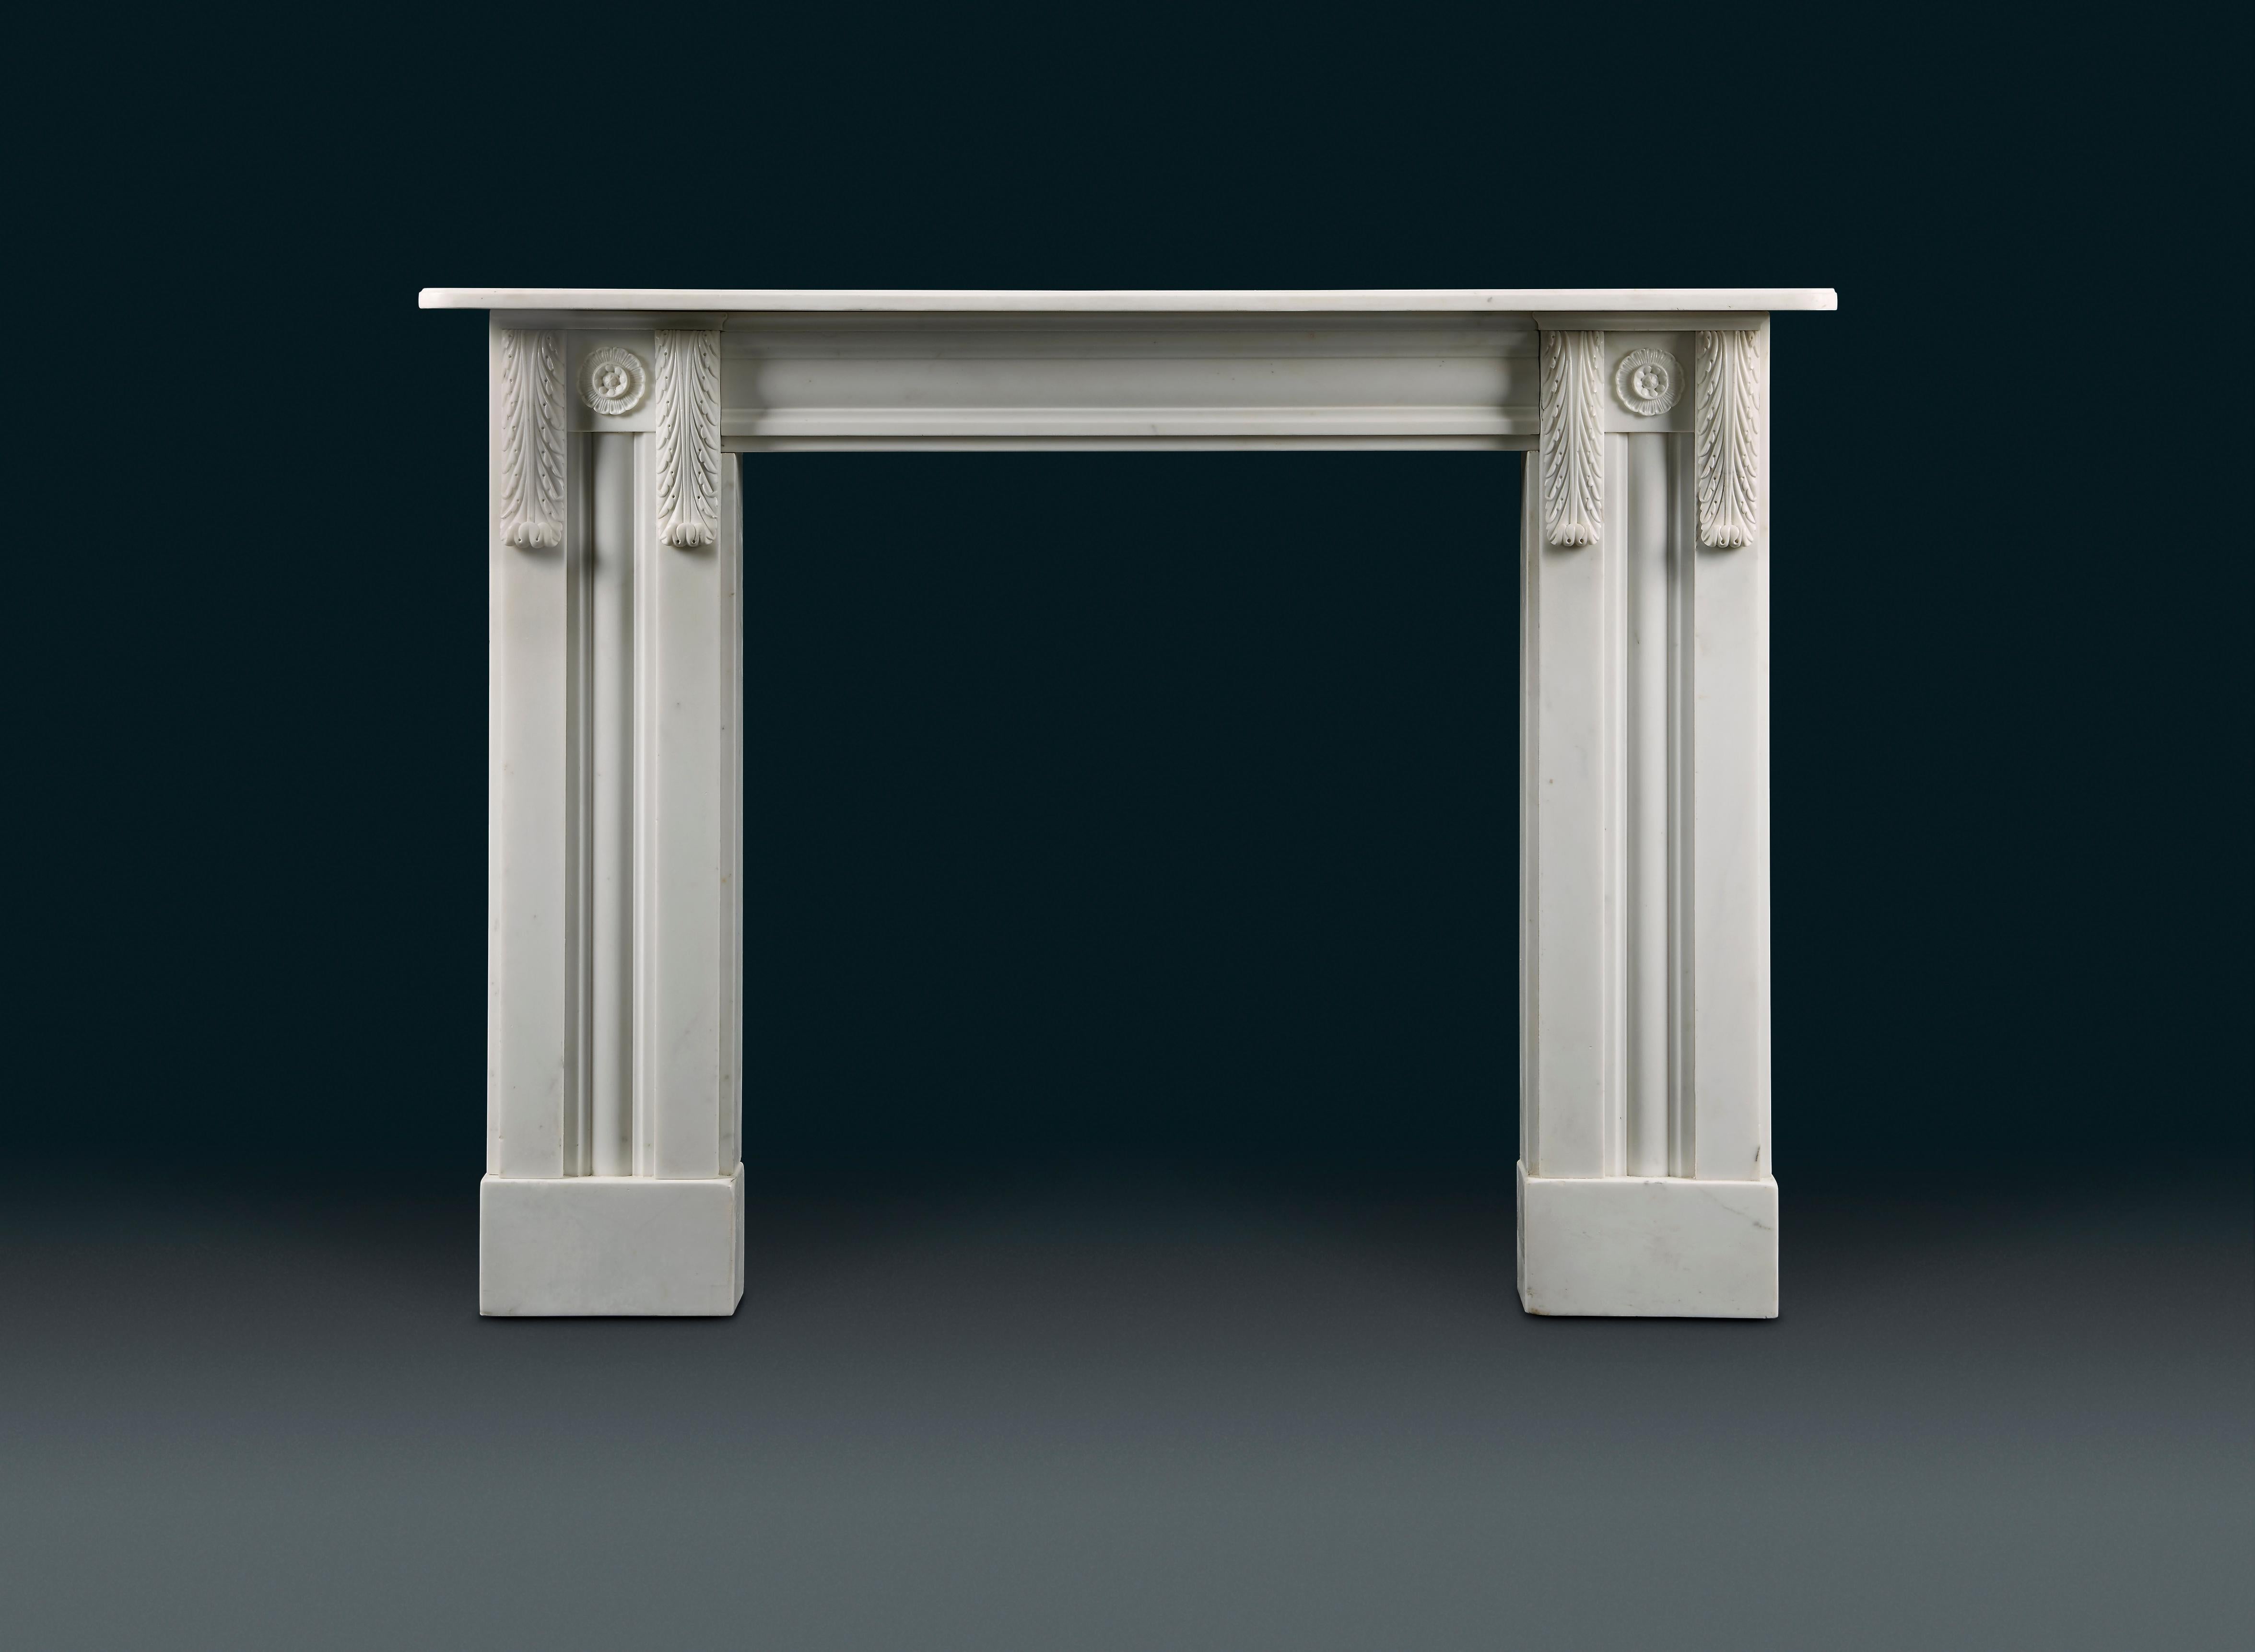 A rare pair of English, late Regency, statuary marble fireplaces. With simple rectangular shelves with rounded corners and ogee edges sitting directly on the inset panelled pulvinated frieze. The jambs with pairs of pilasters capped with acanthus